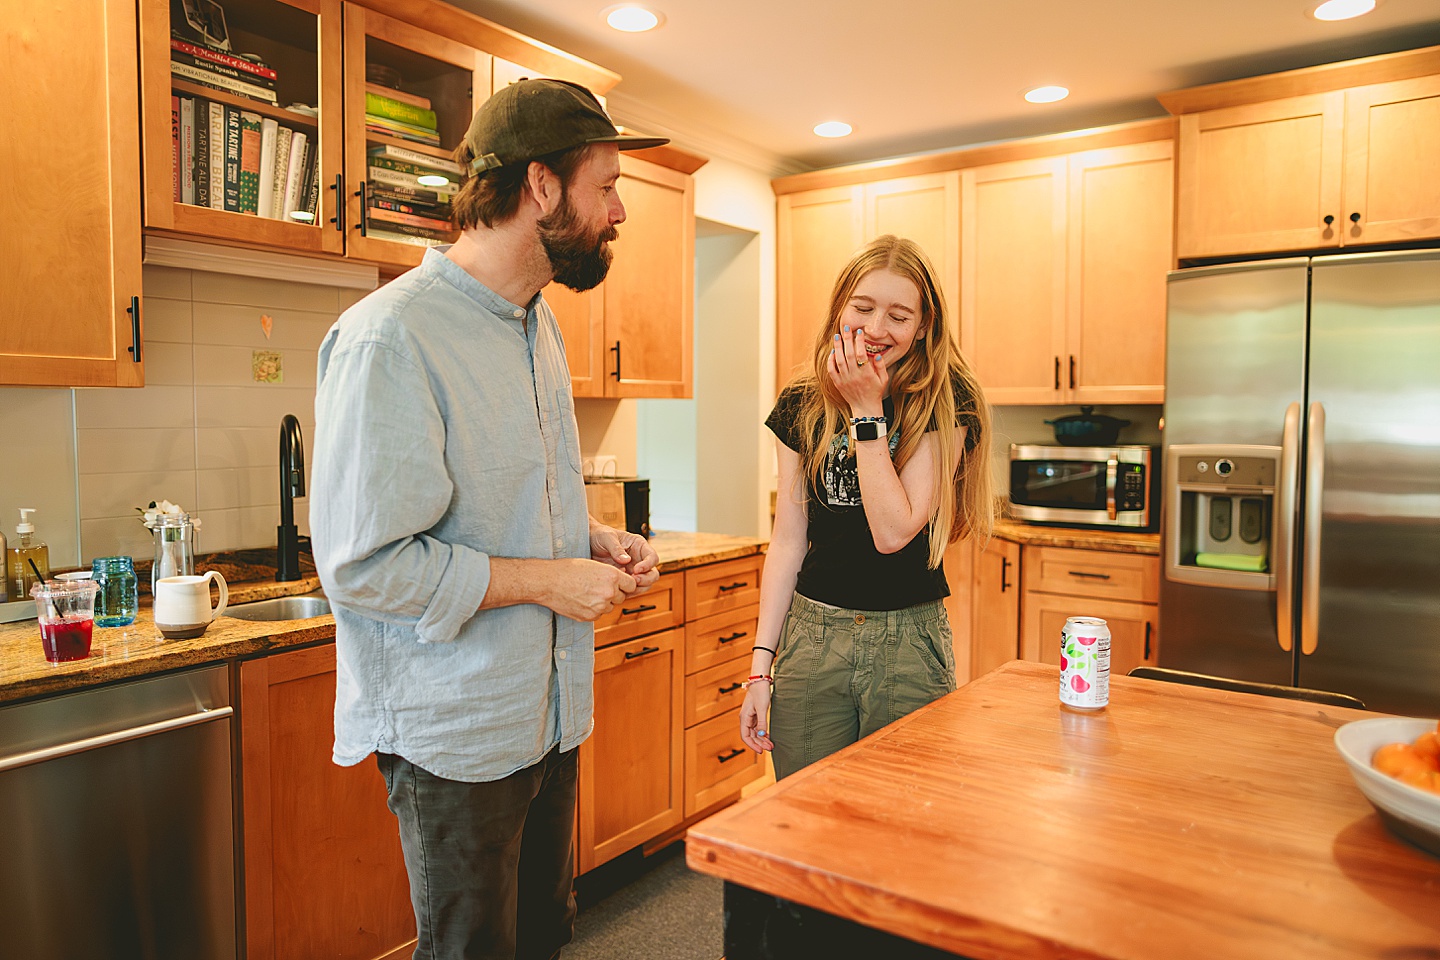 Father and daughter talking in kitchen